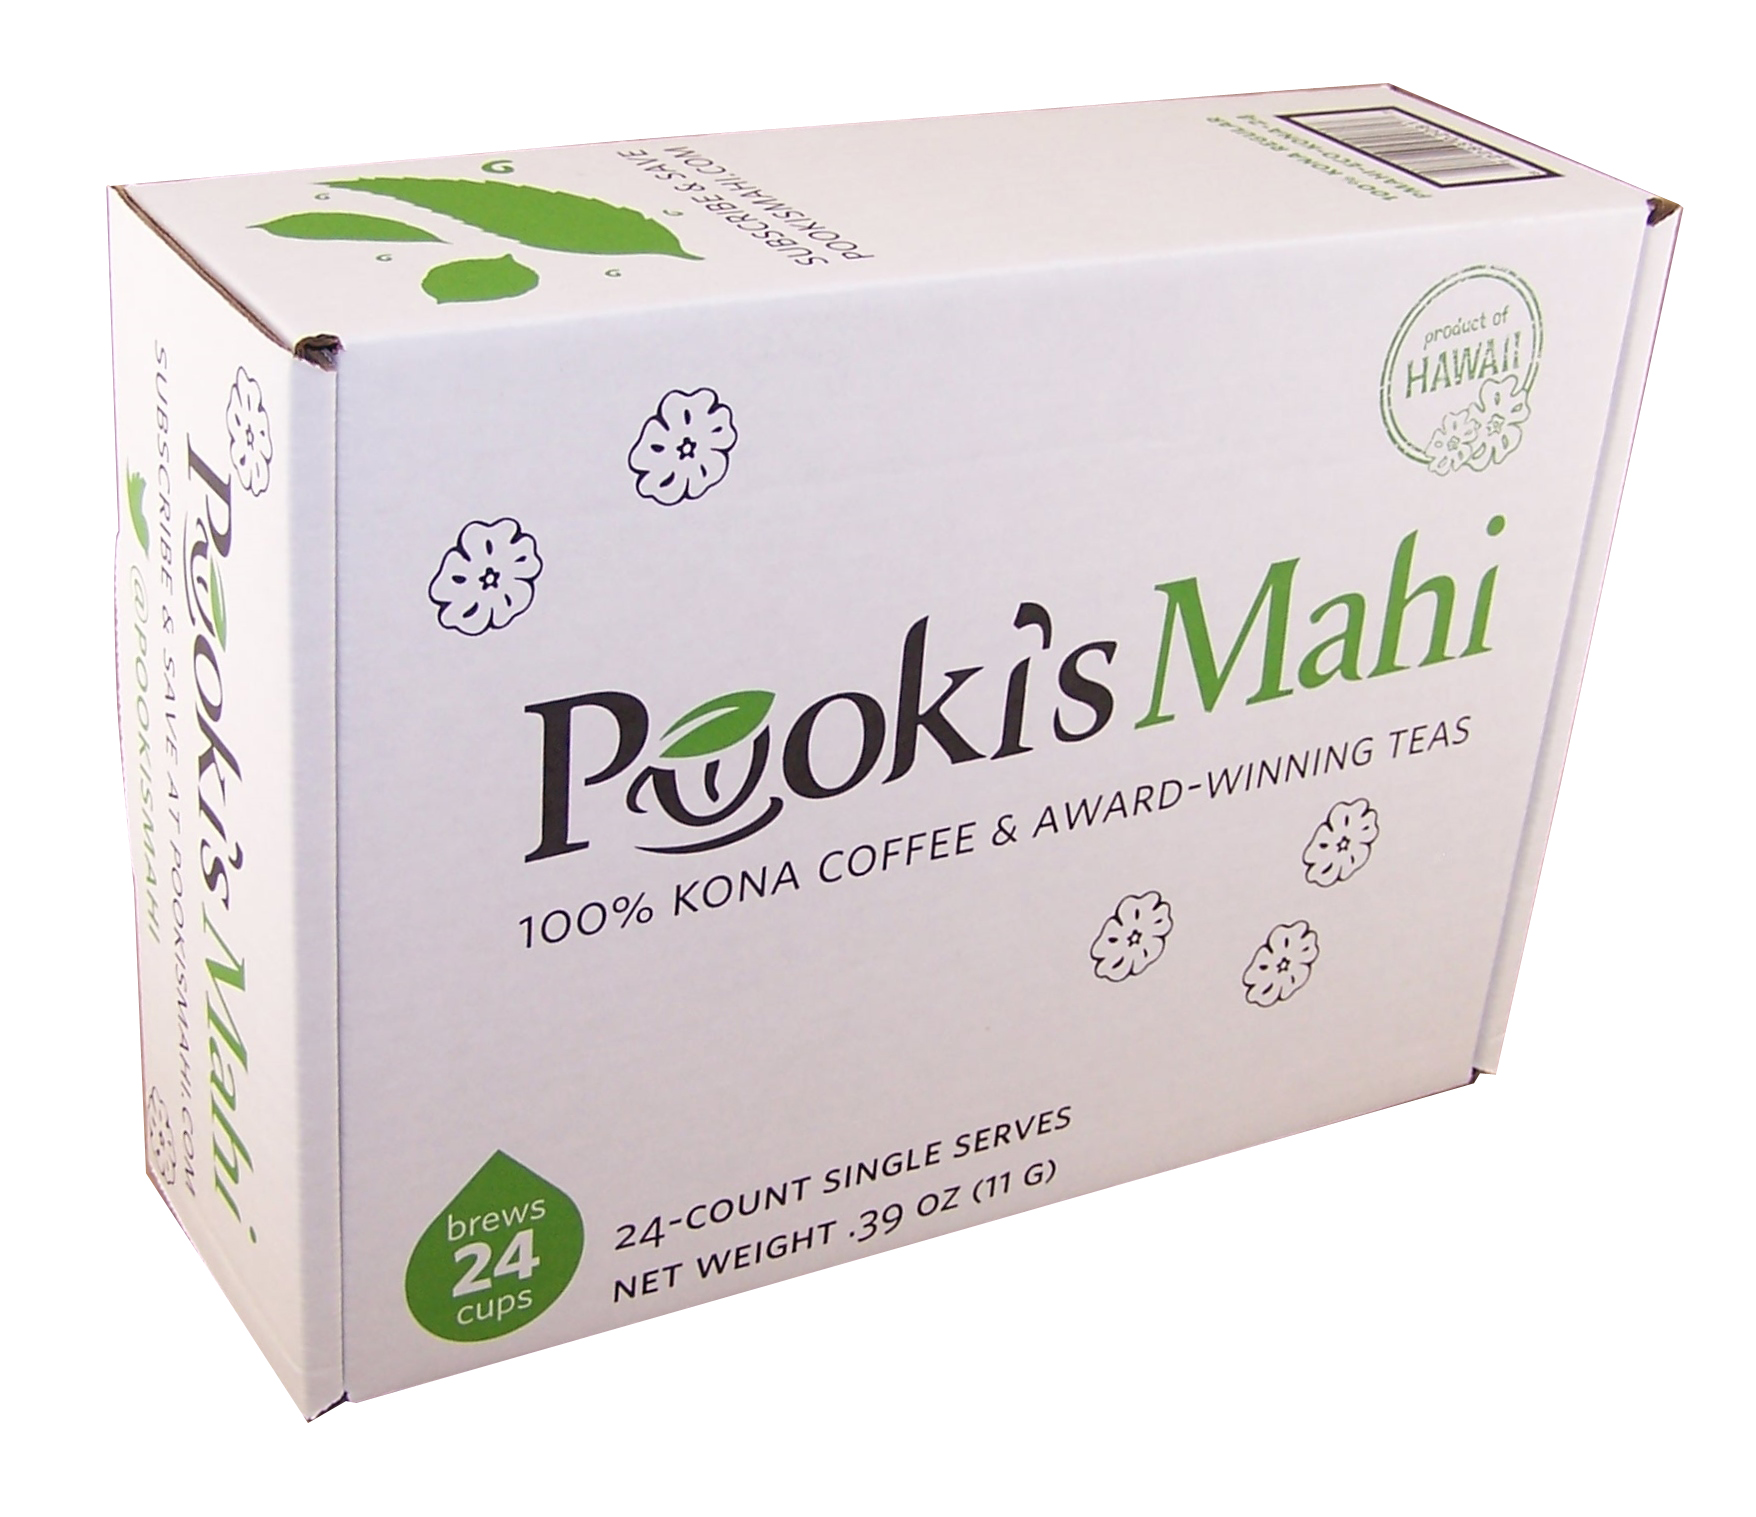 Pooki's Mahi's new environmentally packaging for sustainable 100% Kona coffee single serve pods product line.